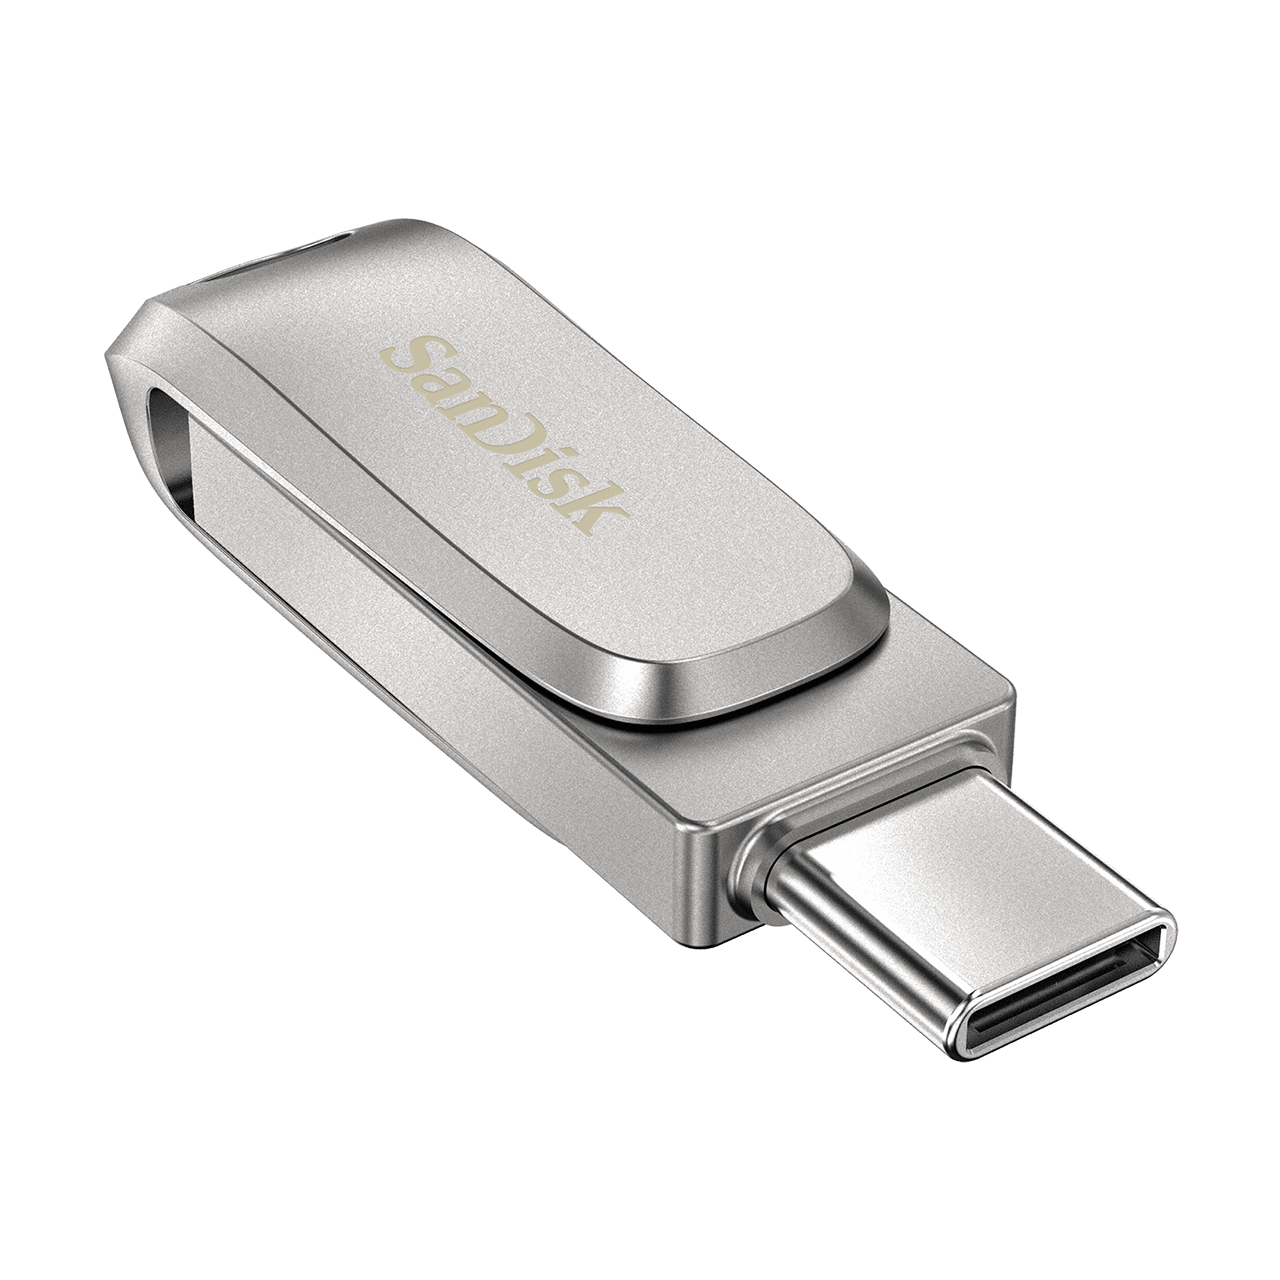 SanDisk Ultra Dual Drive Luxe/32GB/150MBps/USB 3.1/USB-A + USB-C/Stbrn